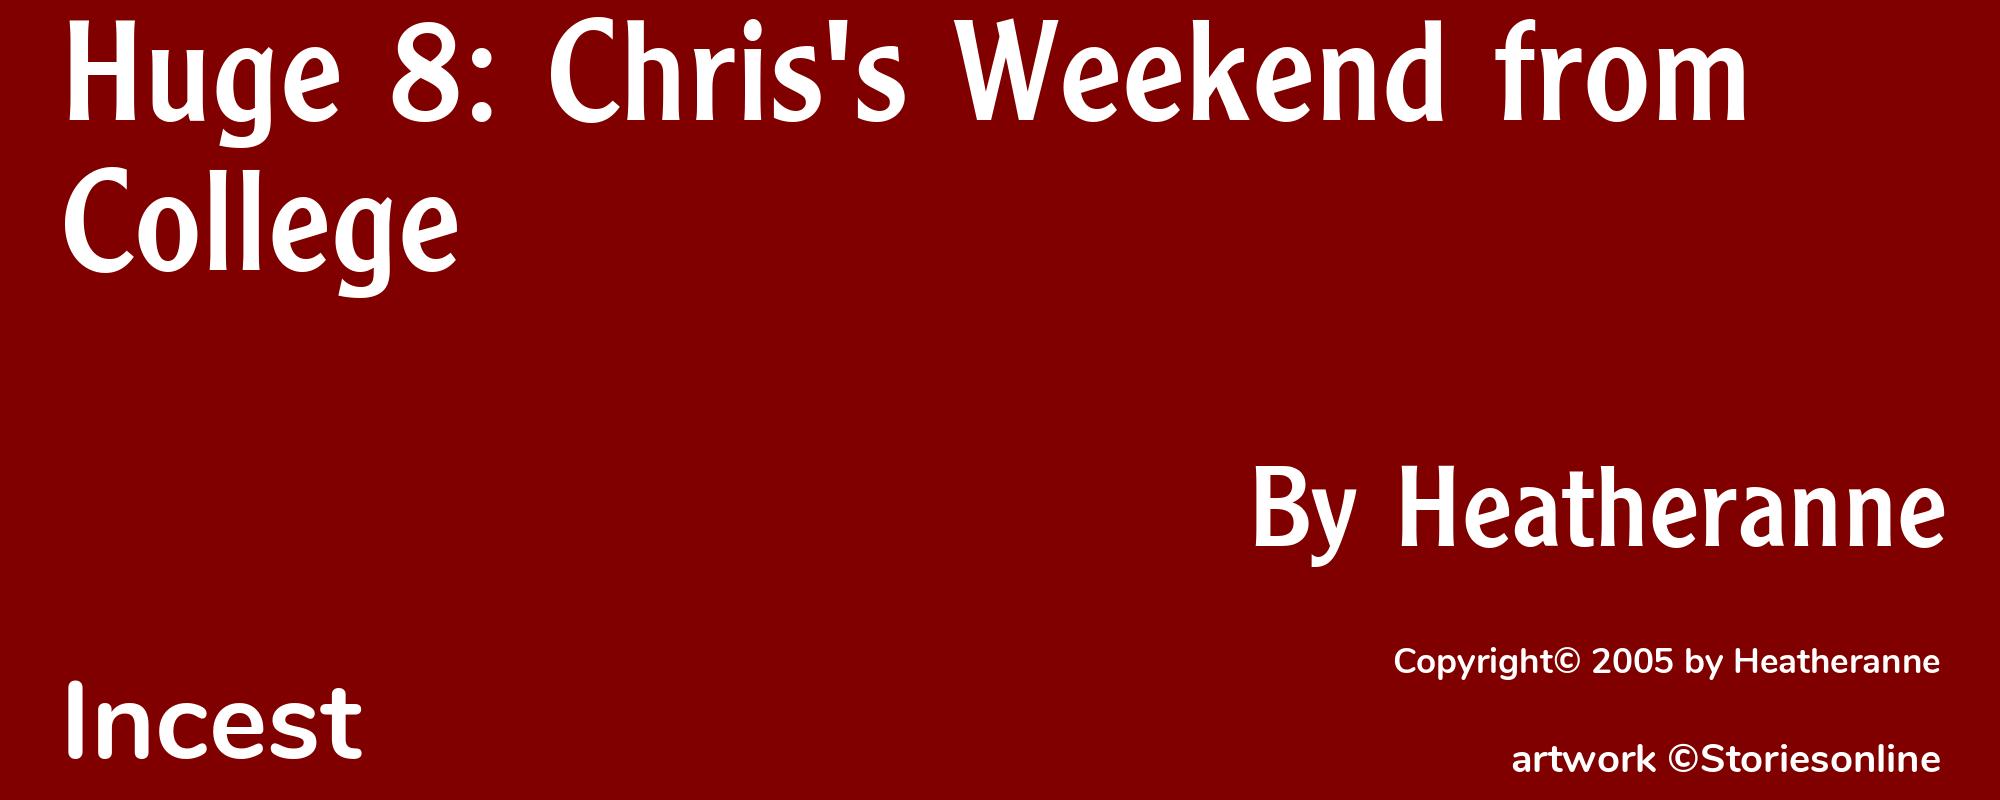 Huge 8: Chris's Weekend from College - Cover